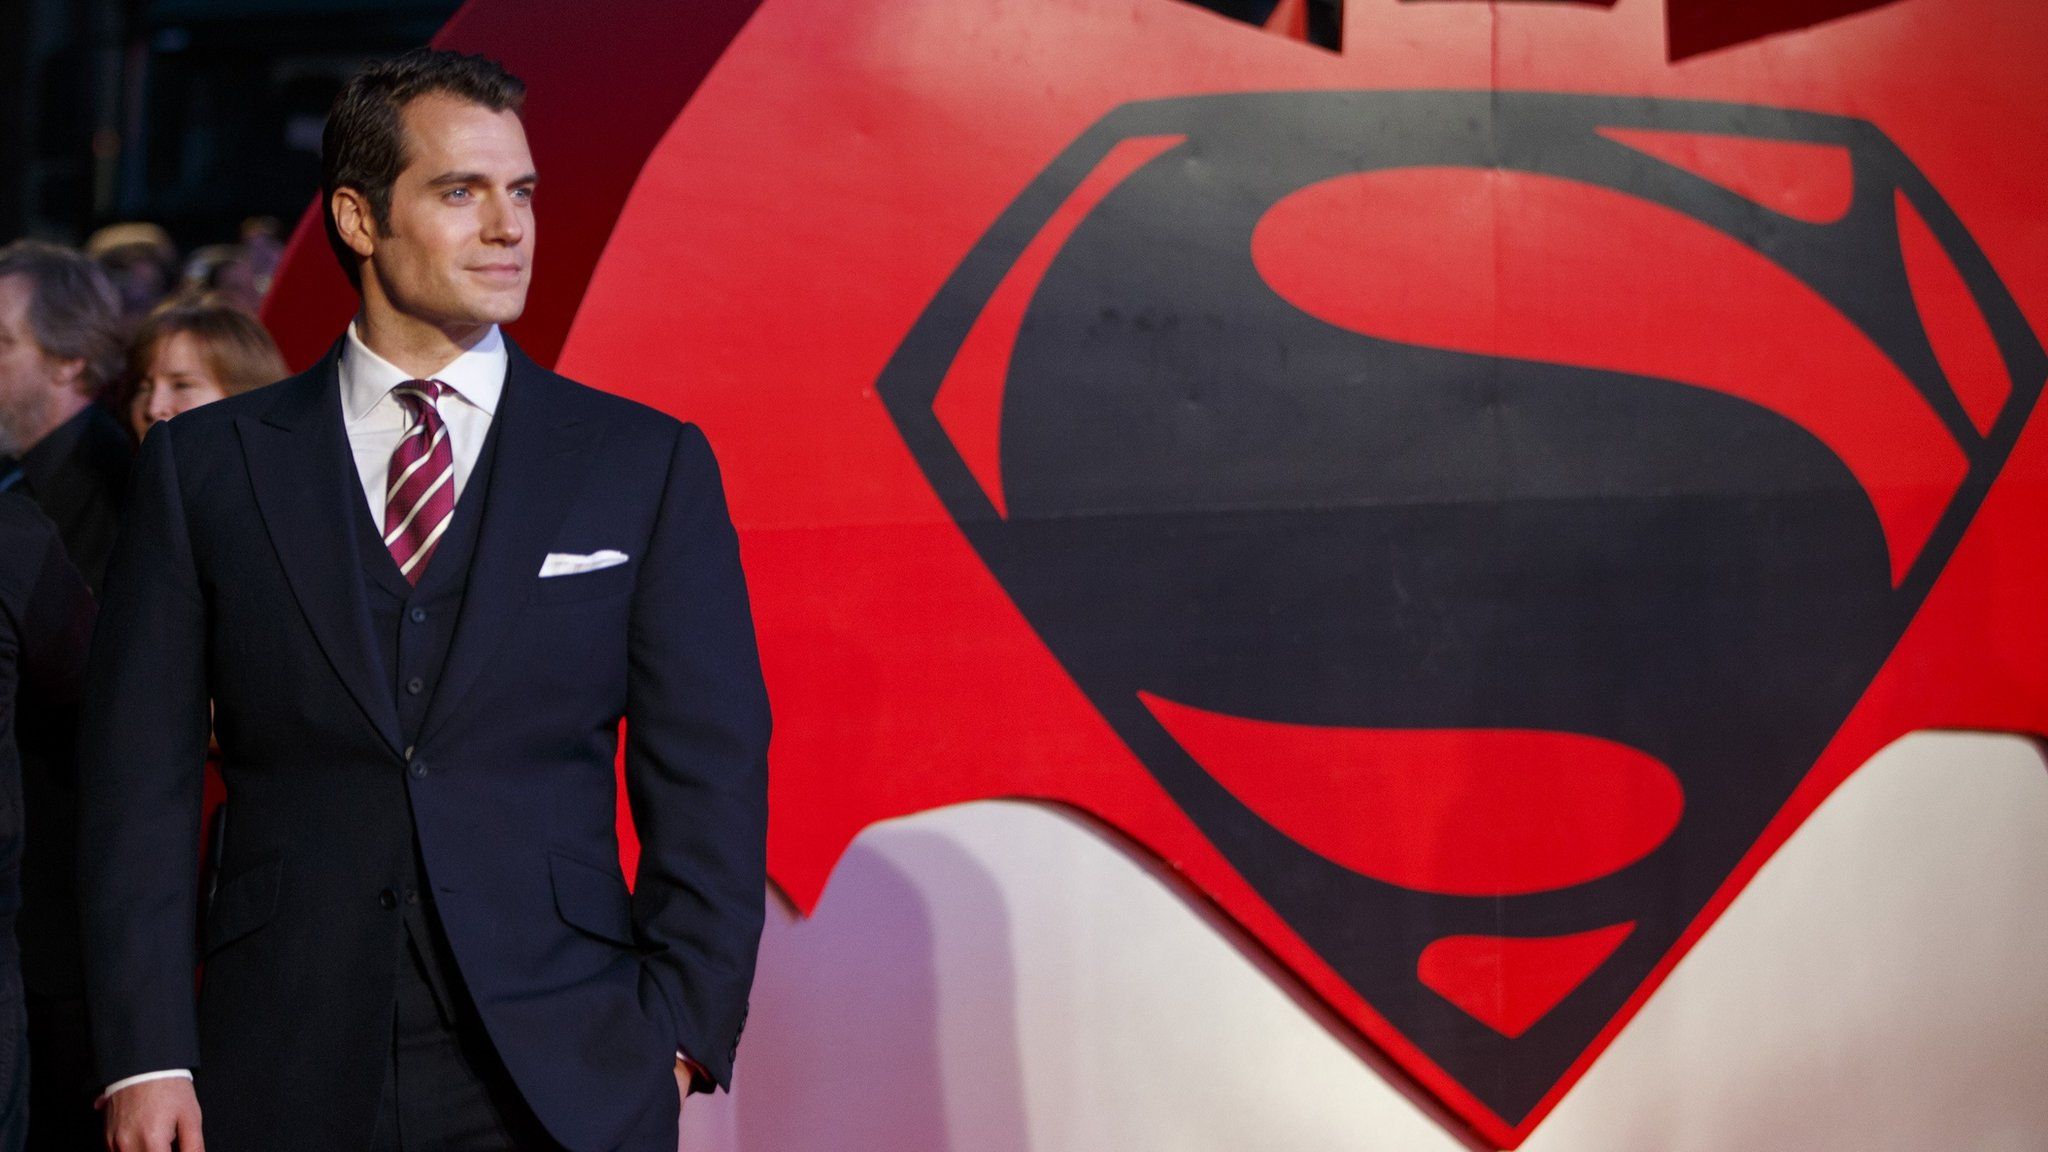 Henry Cavill News, Pictures, and Videos - E! Online